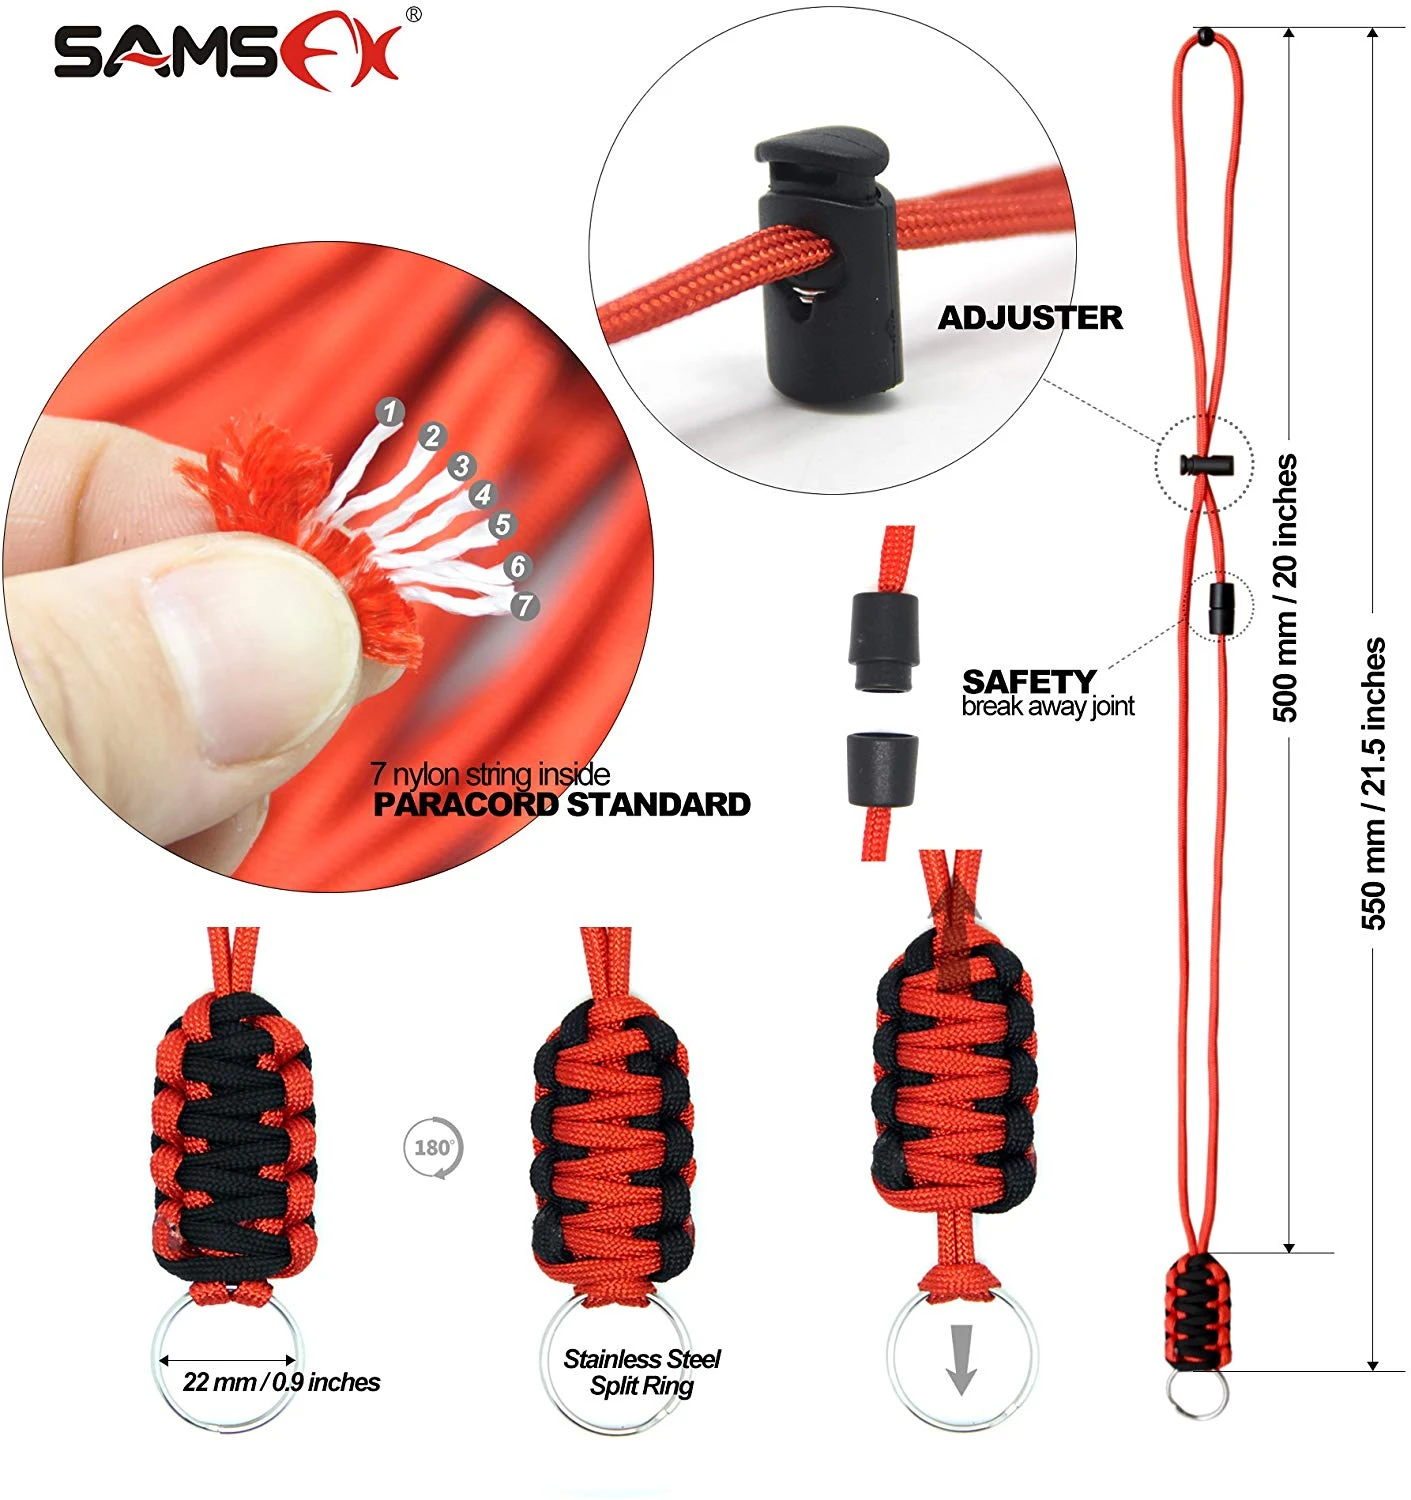 SAMSFX Fishing Tippet Spool Holder Fly Fishing Lanyard Survival Safety Breakaway Neck Strap 3 Pieces in Pack